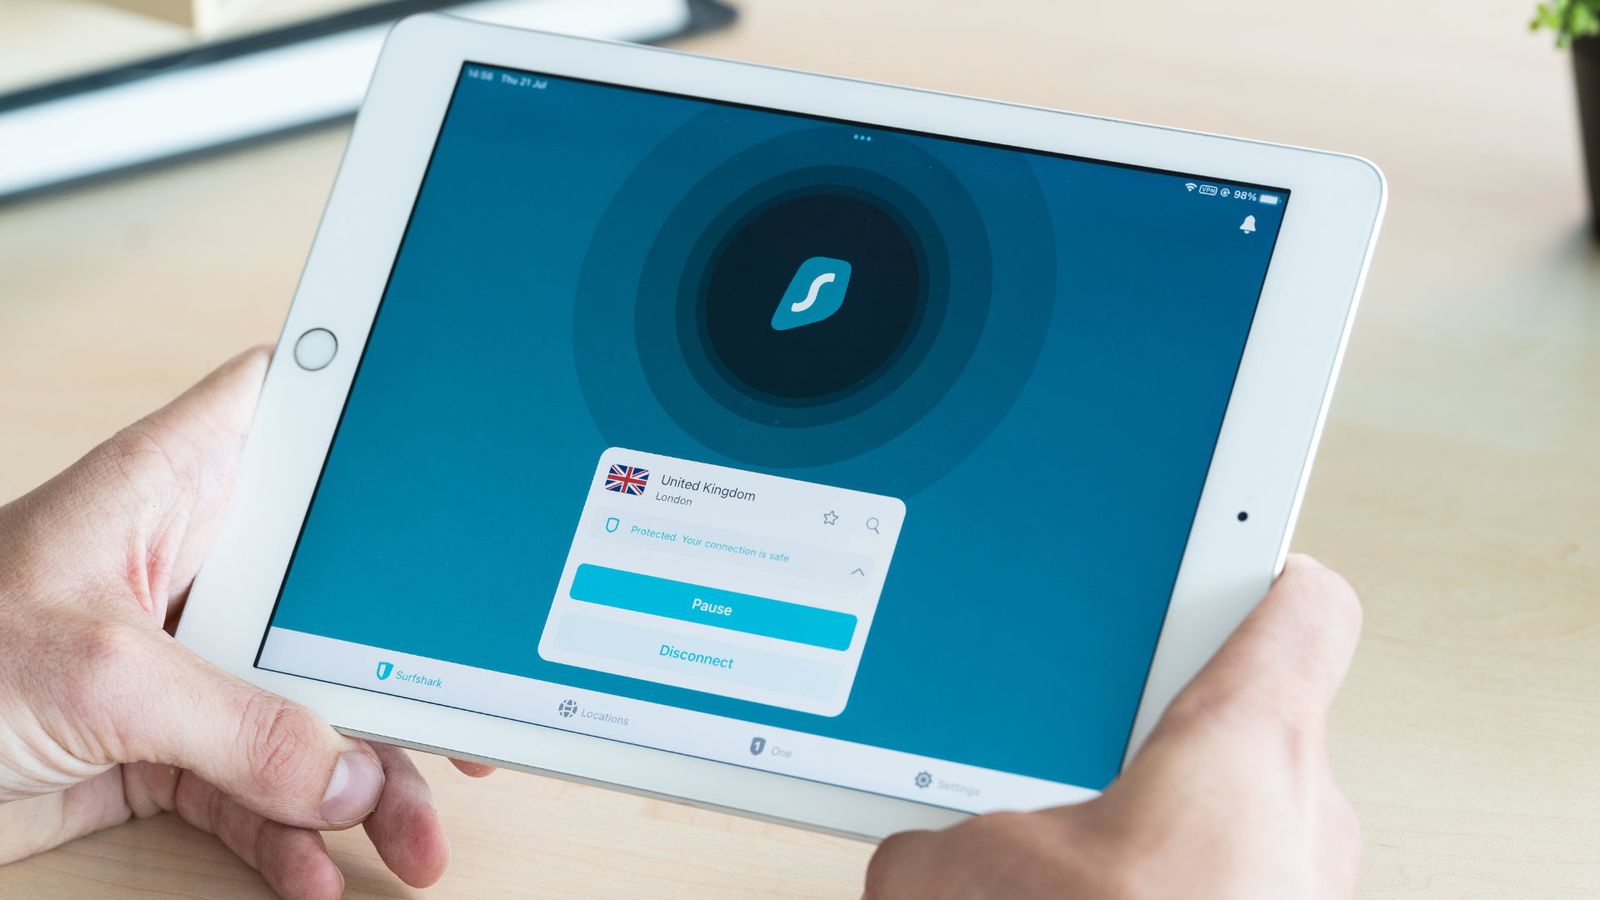 Surfshark VPN is on a white Android tablet, held by two hands